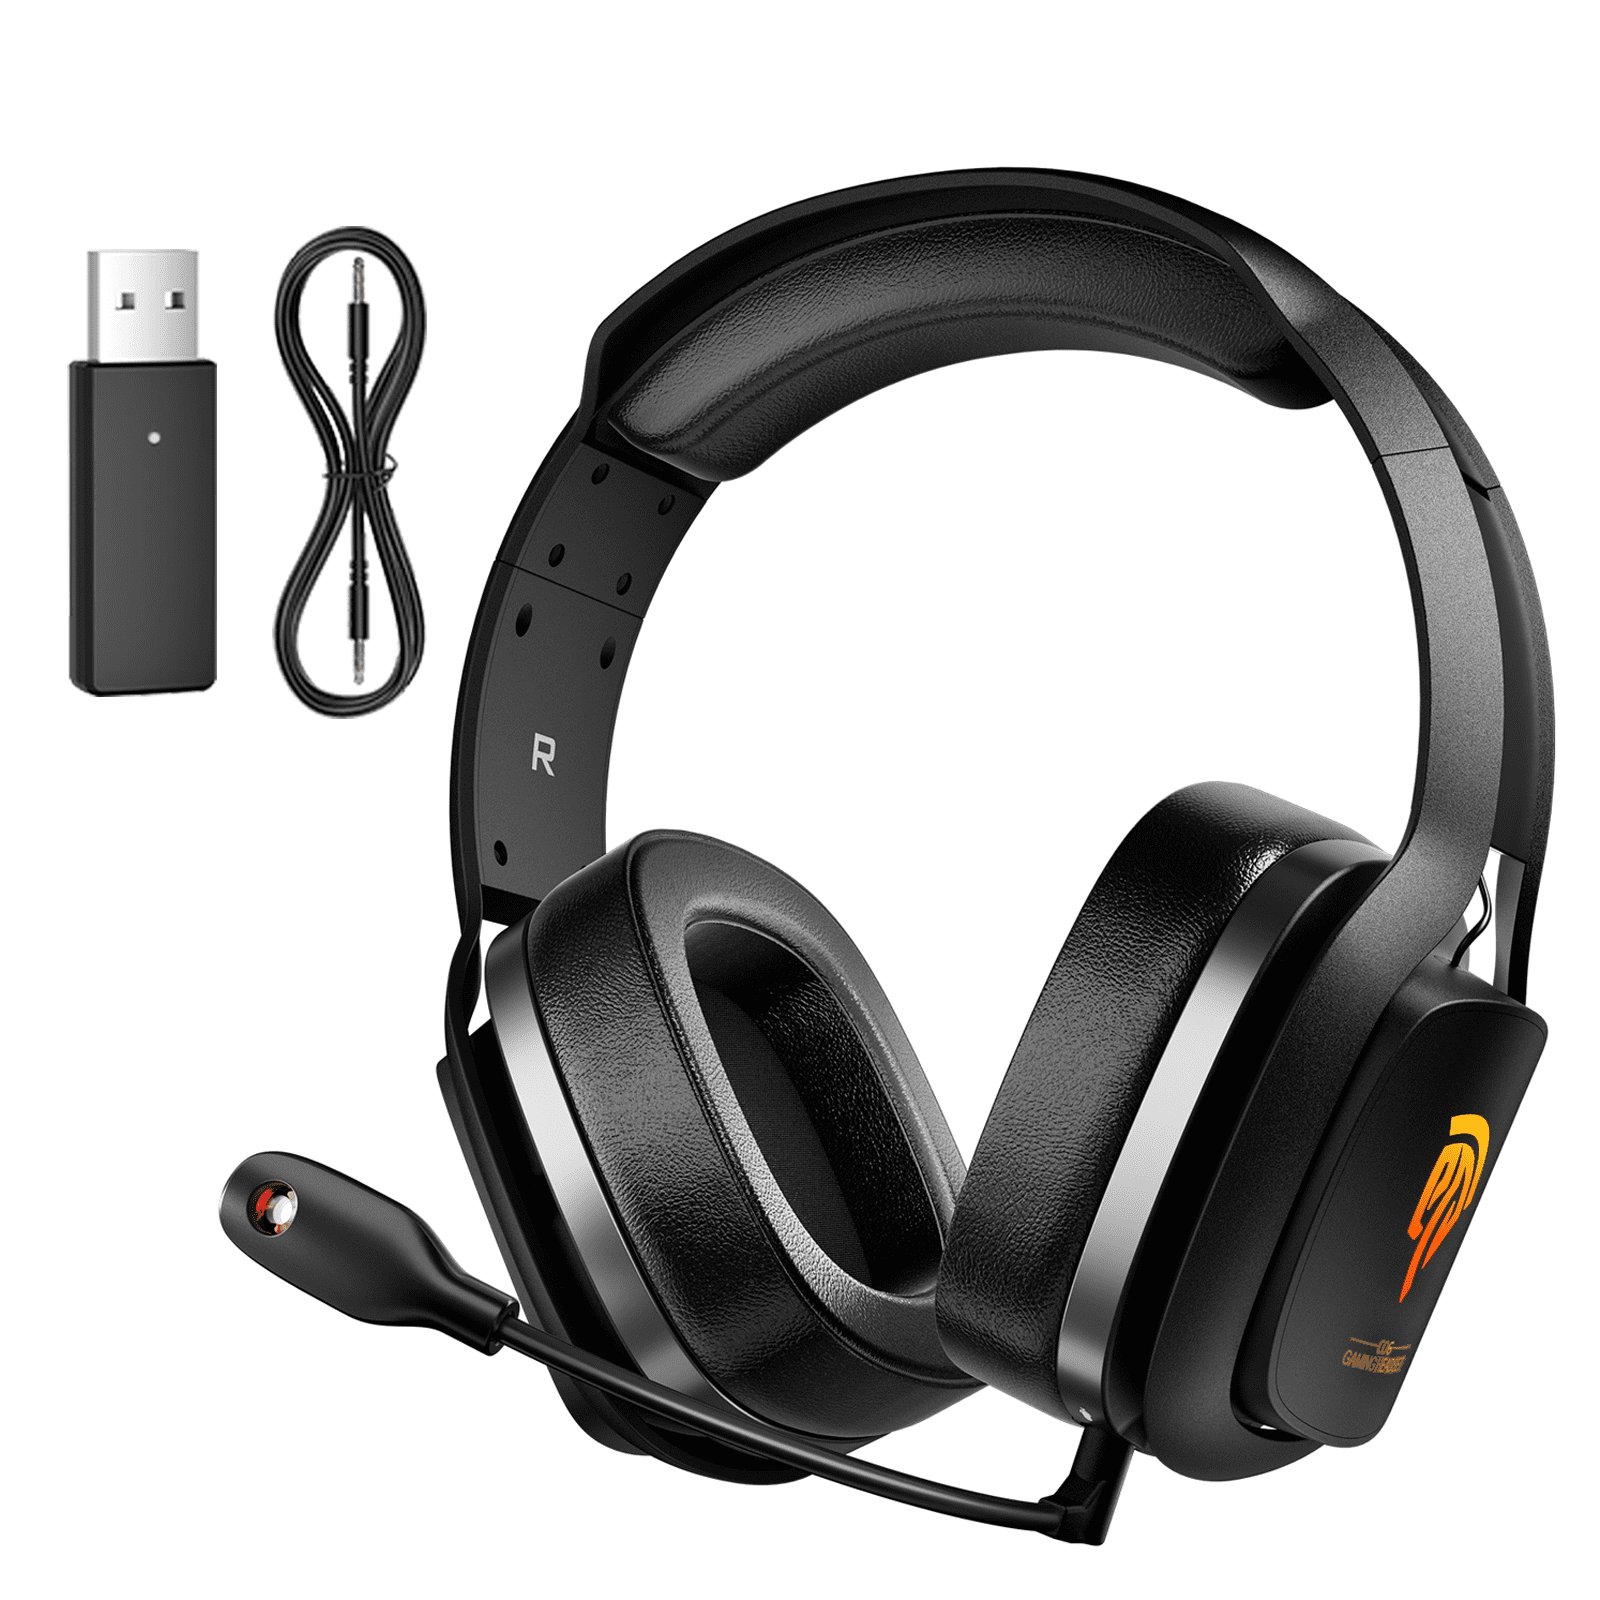 Wireless Noise-Canceling Headset for Gaming & Entertainment